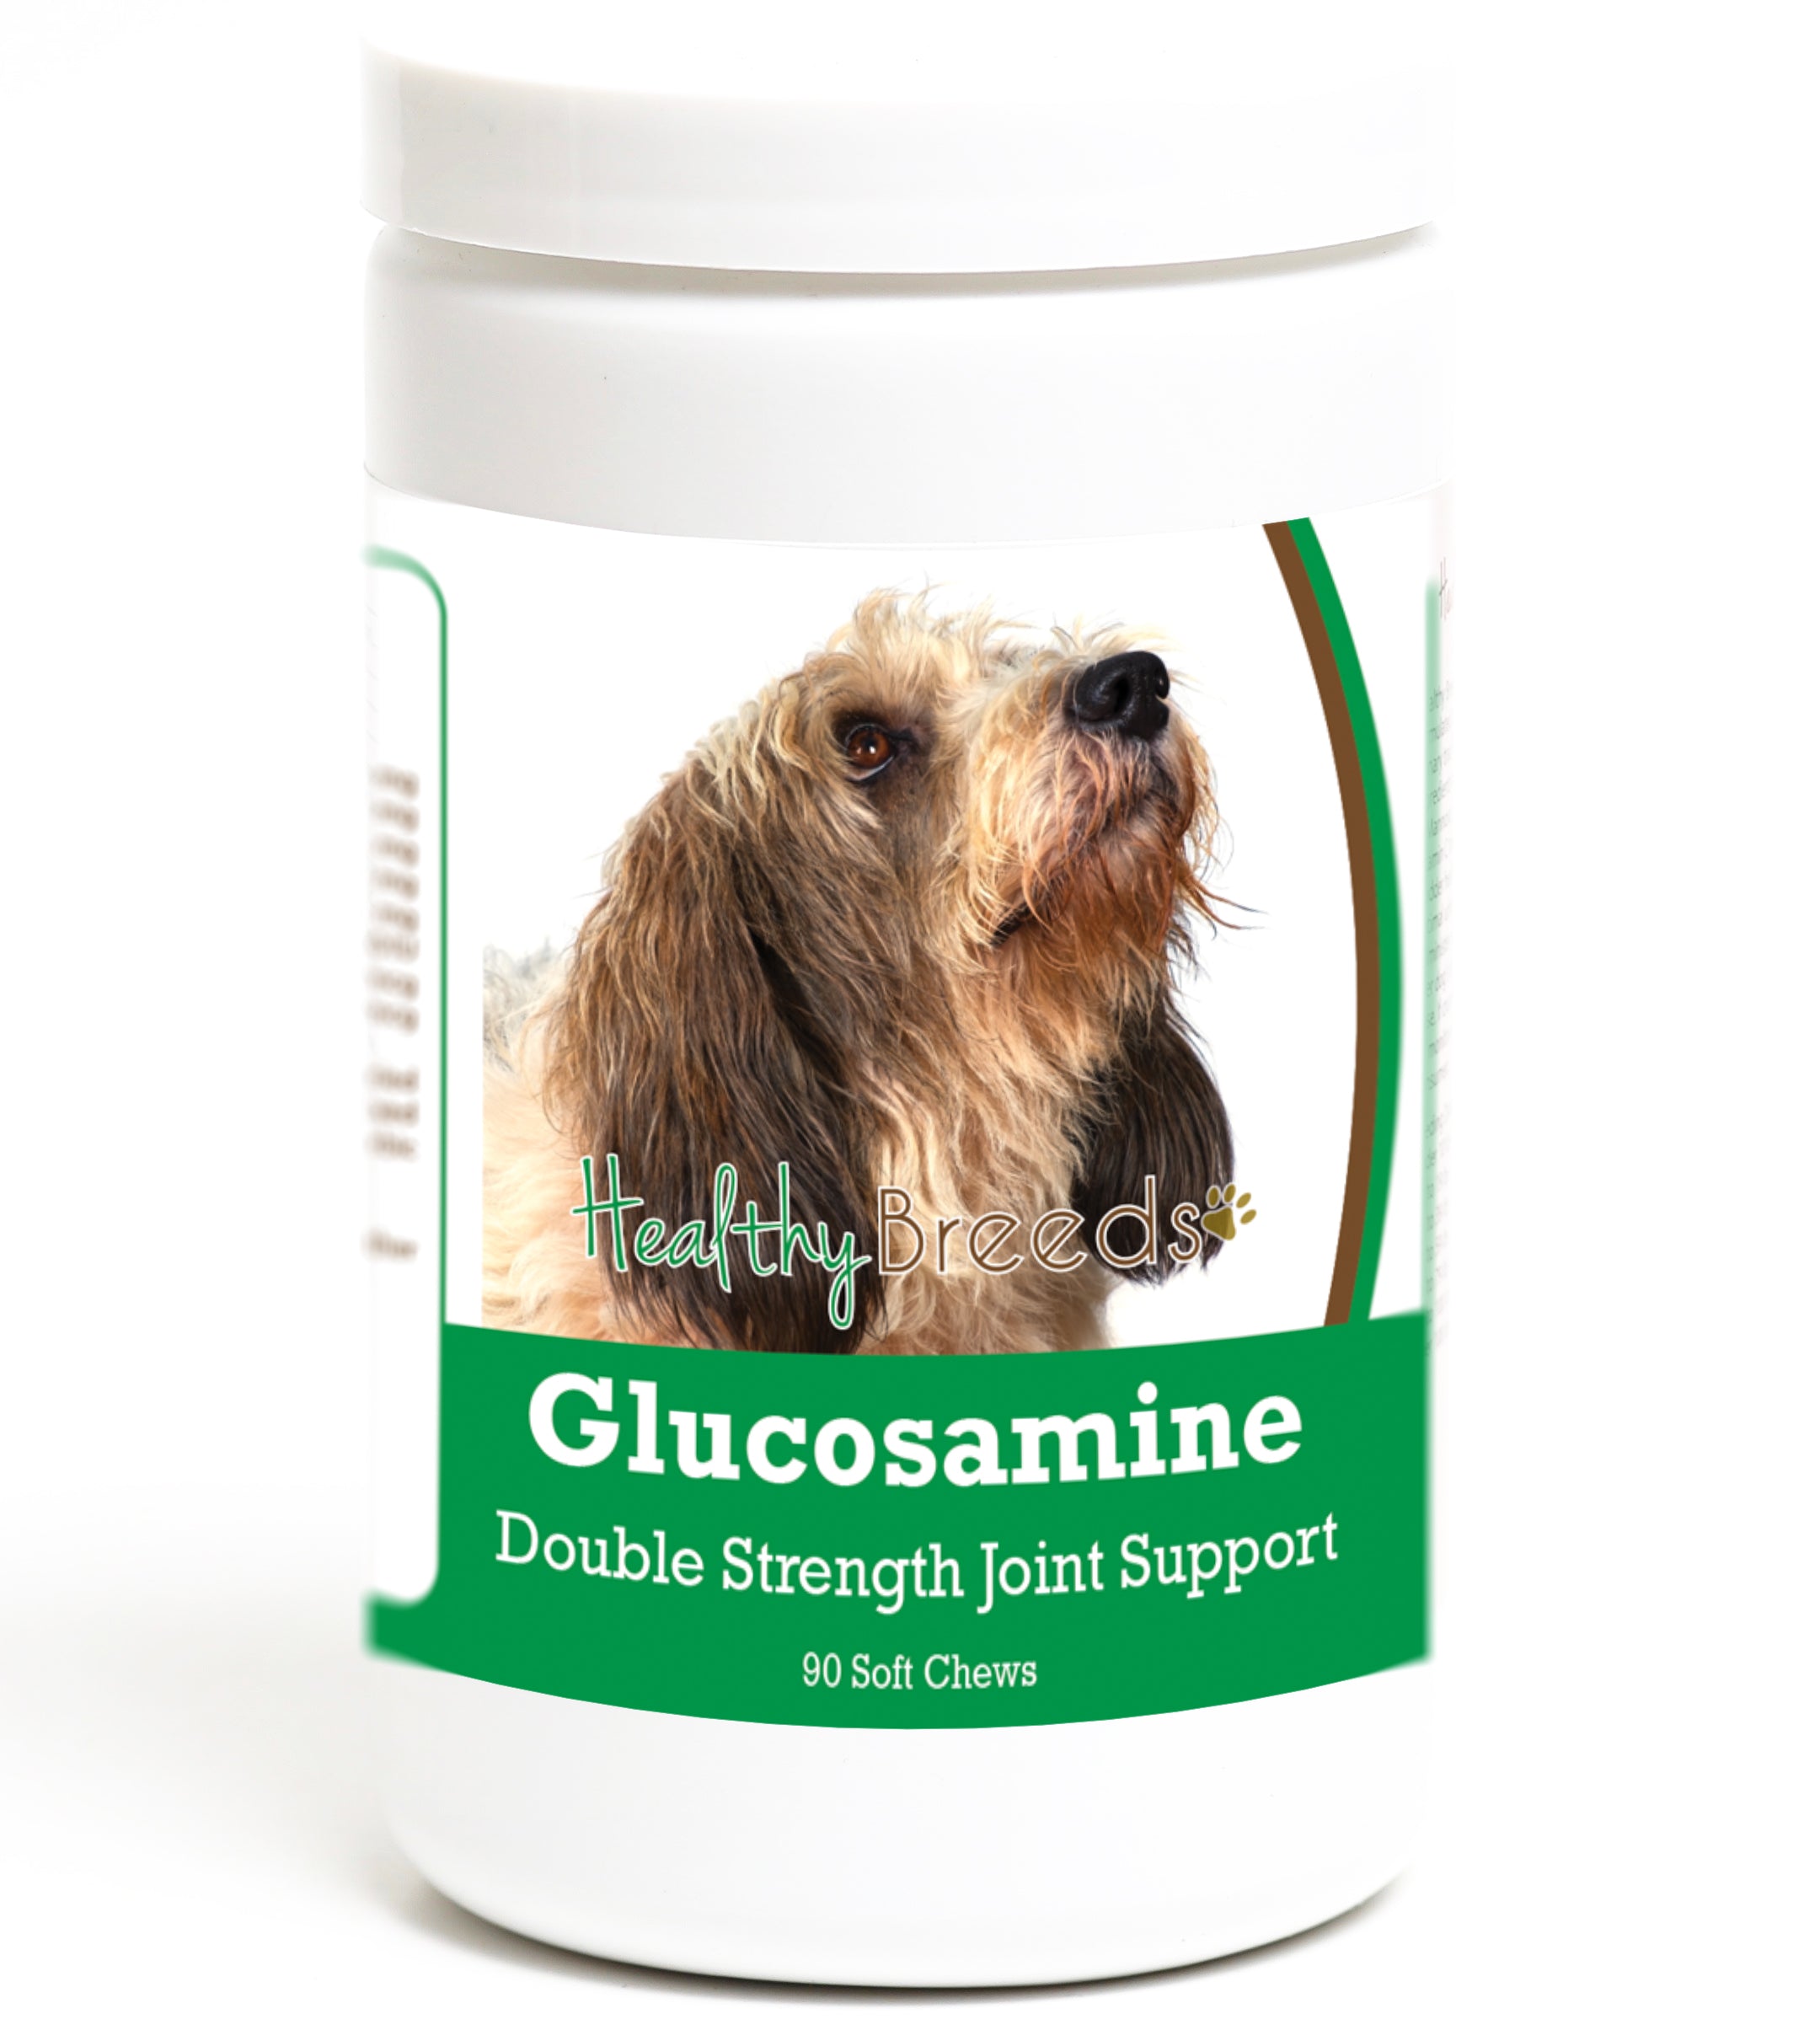 Petits Bassets Griffons Vendeen Glucosamine DS Plus MSM 90 Count